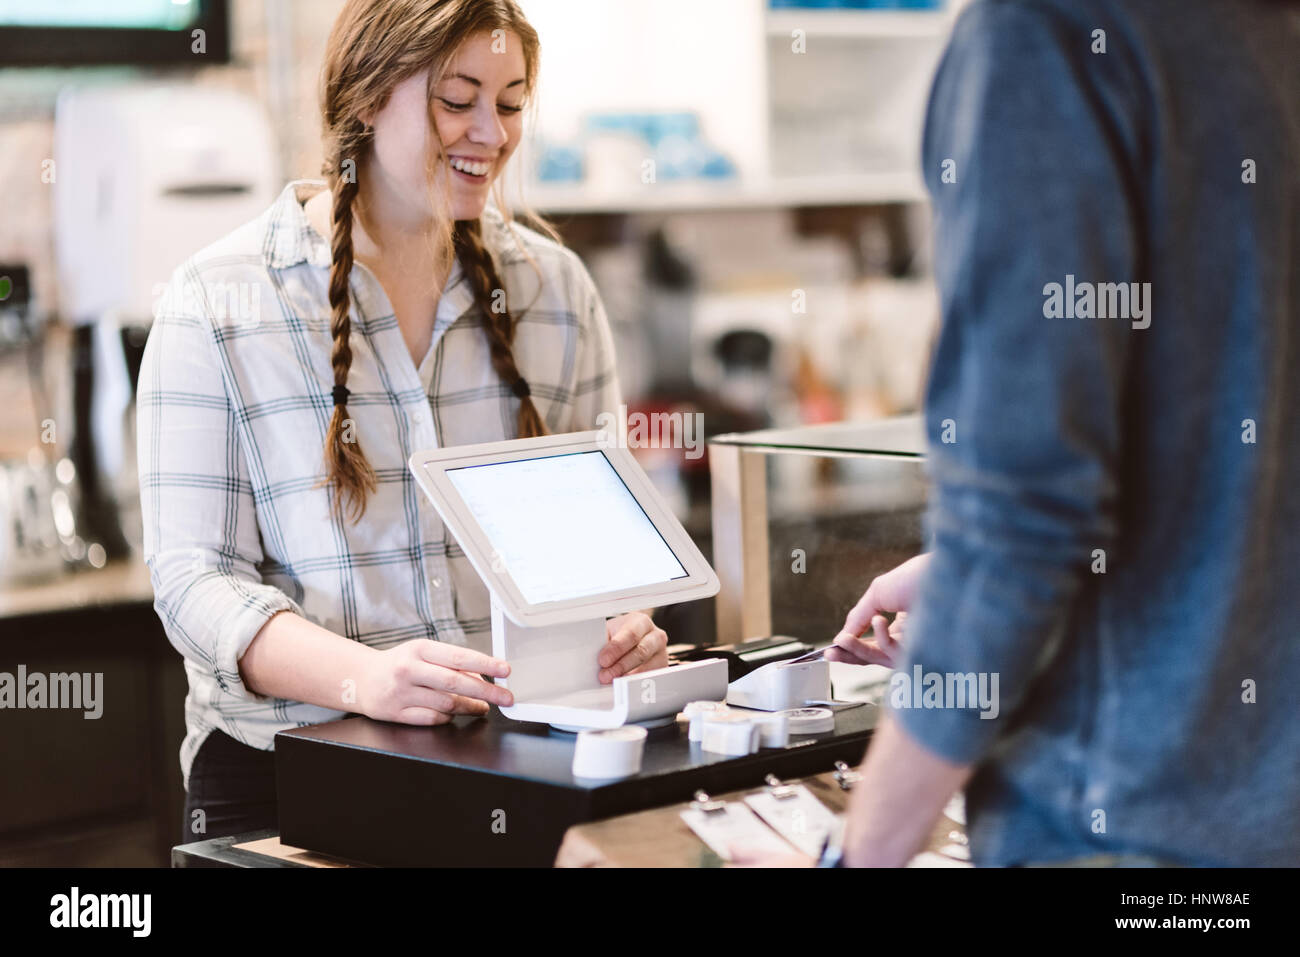 Cashier attending to customer in cafe Stock Photo